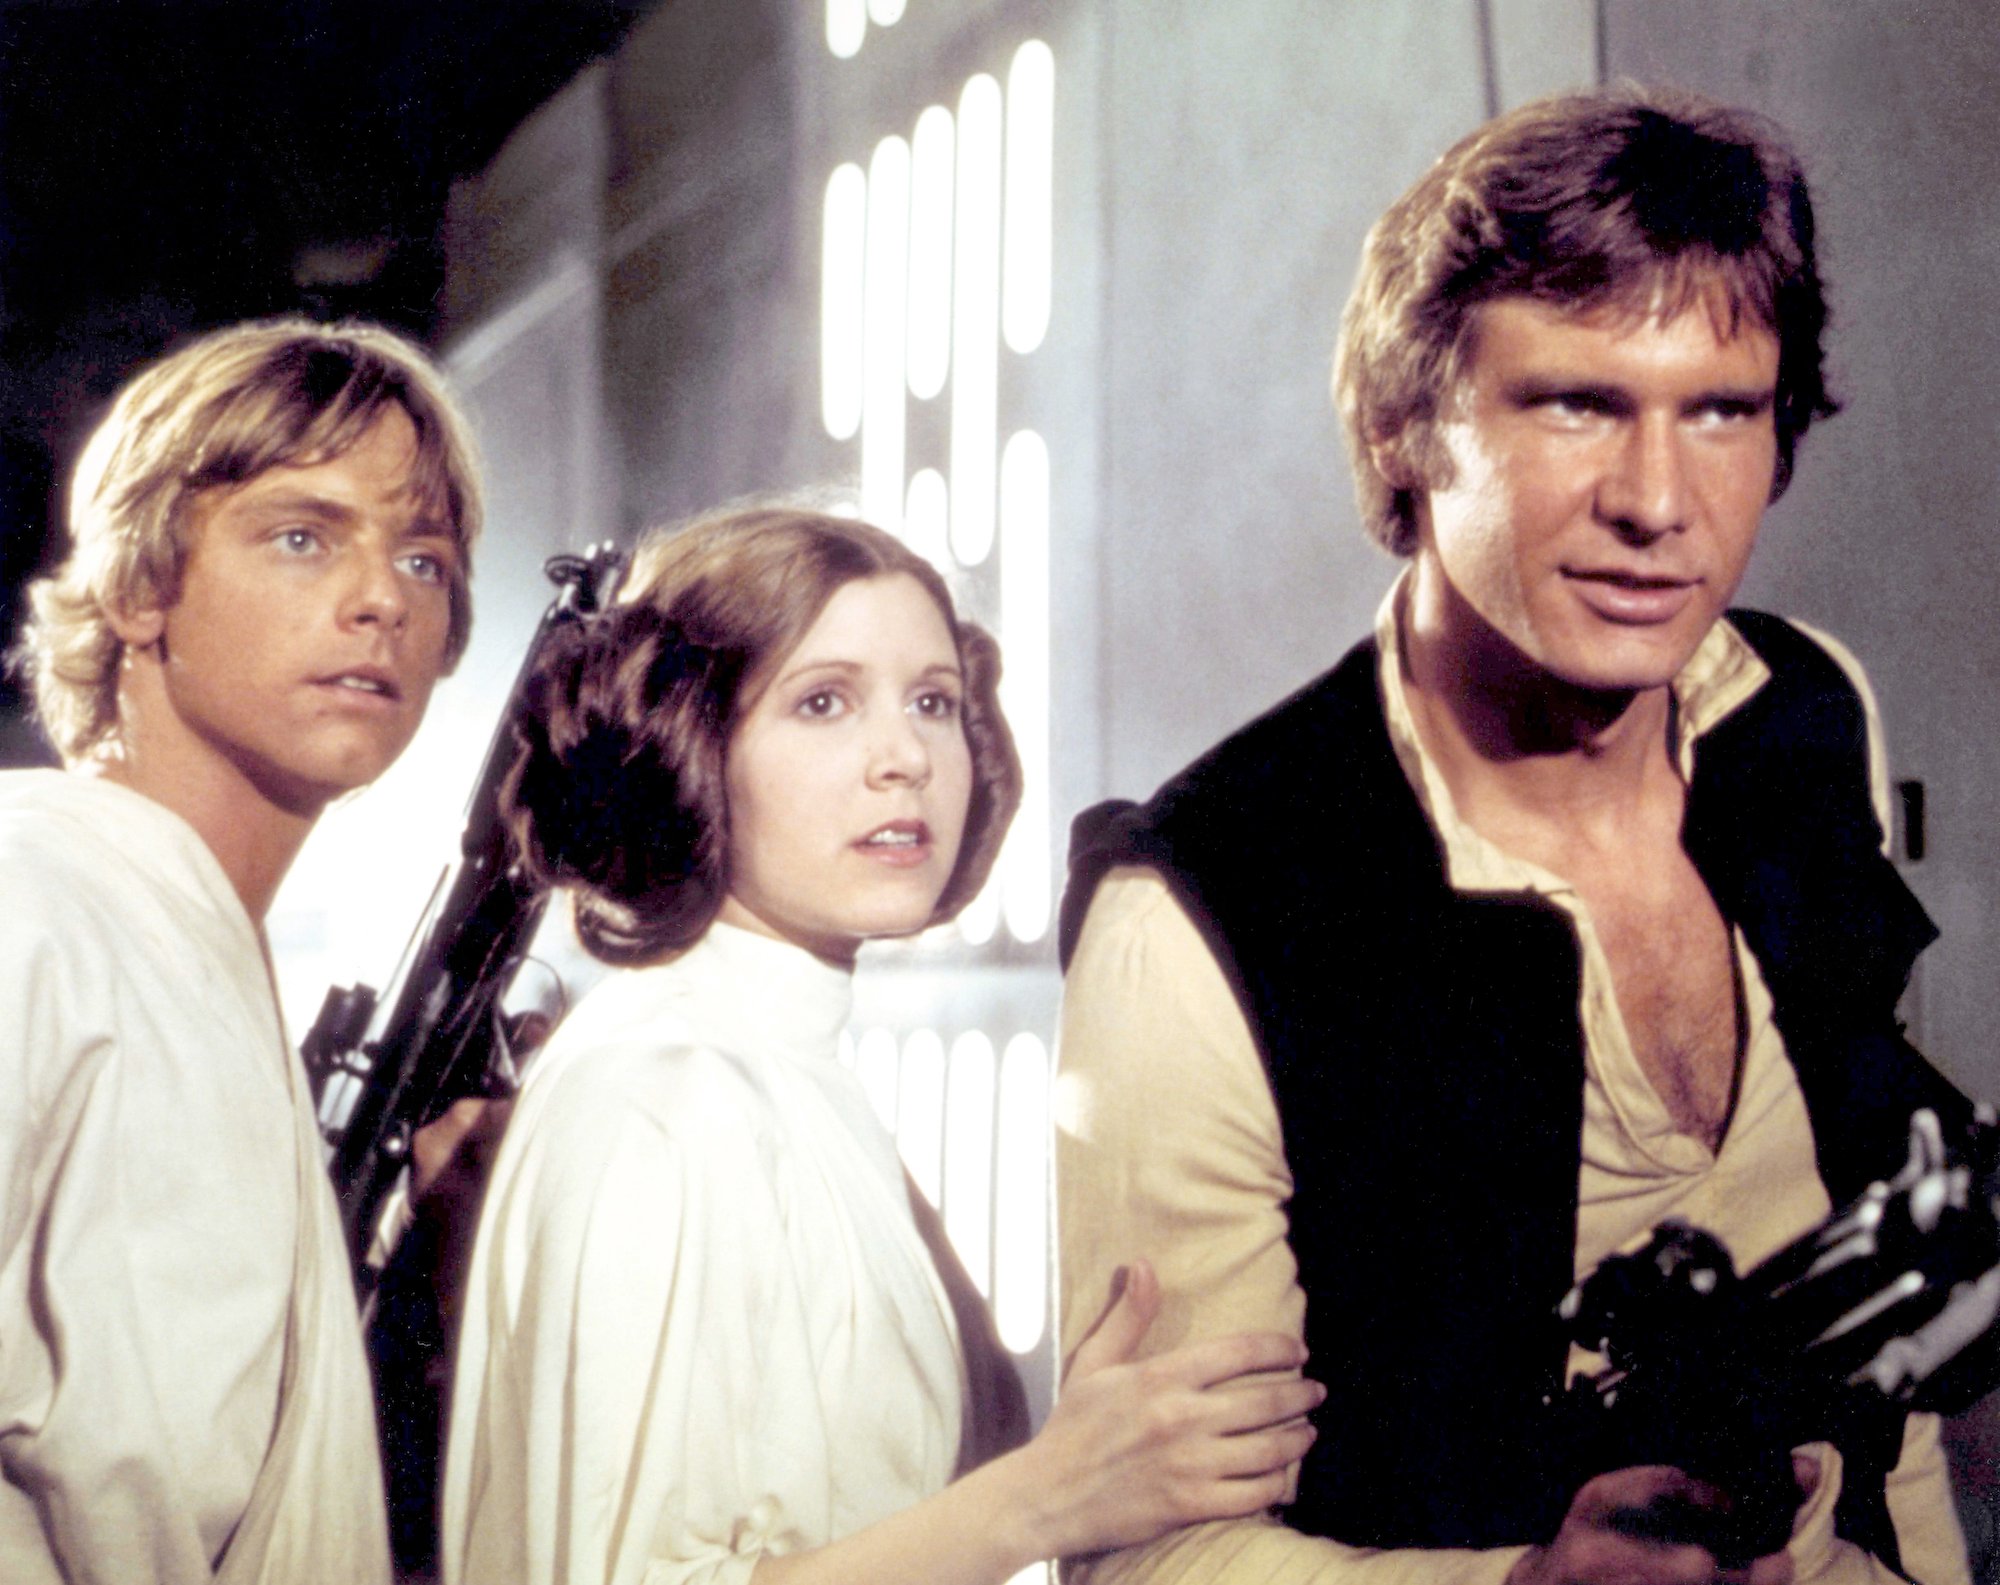 'Star Wars': Luke Skywalker, Princess Leia and Han Solo try to escape the Death Star